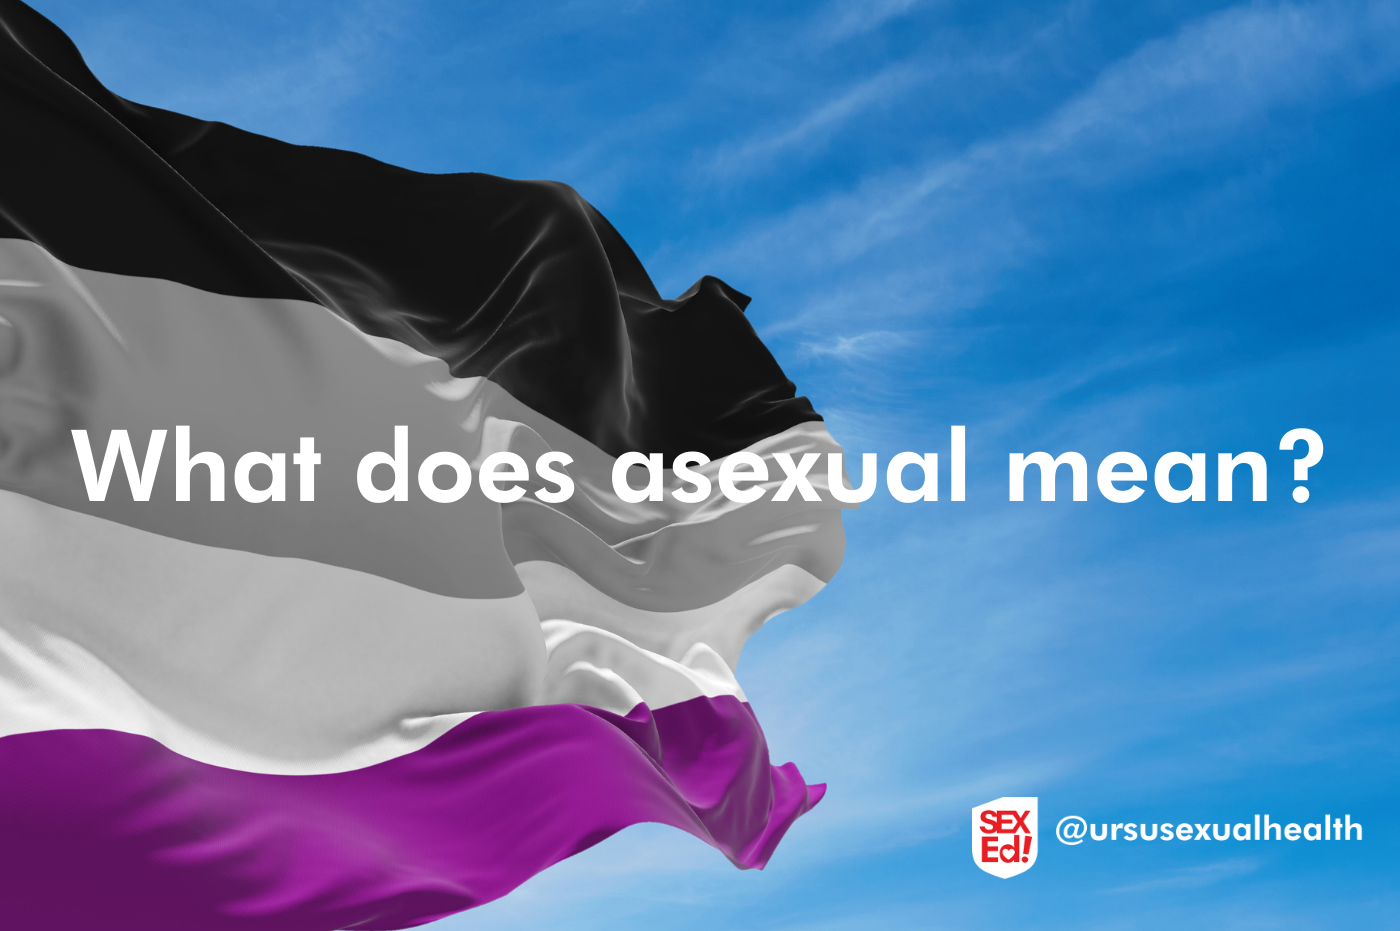 What is asexual mean